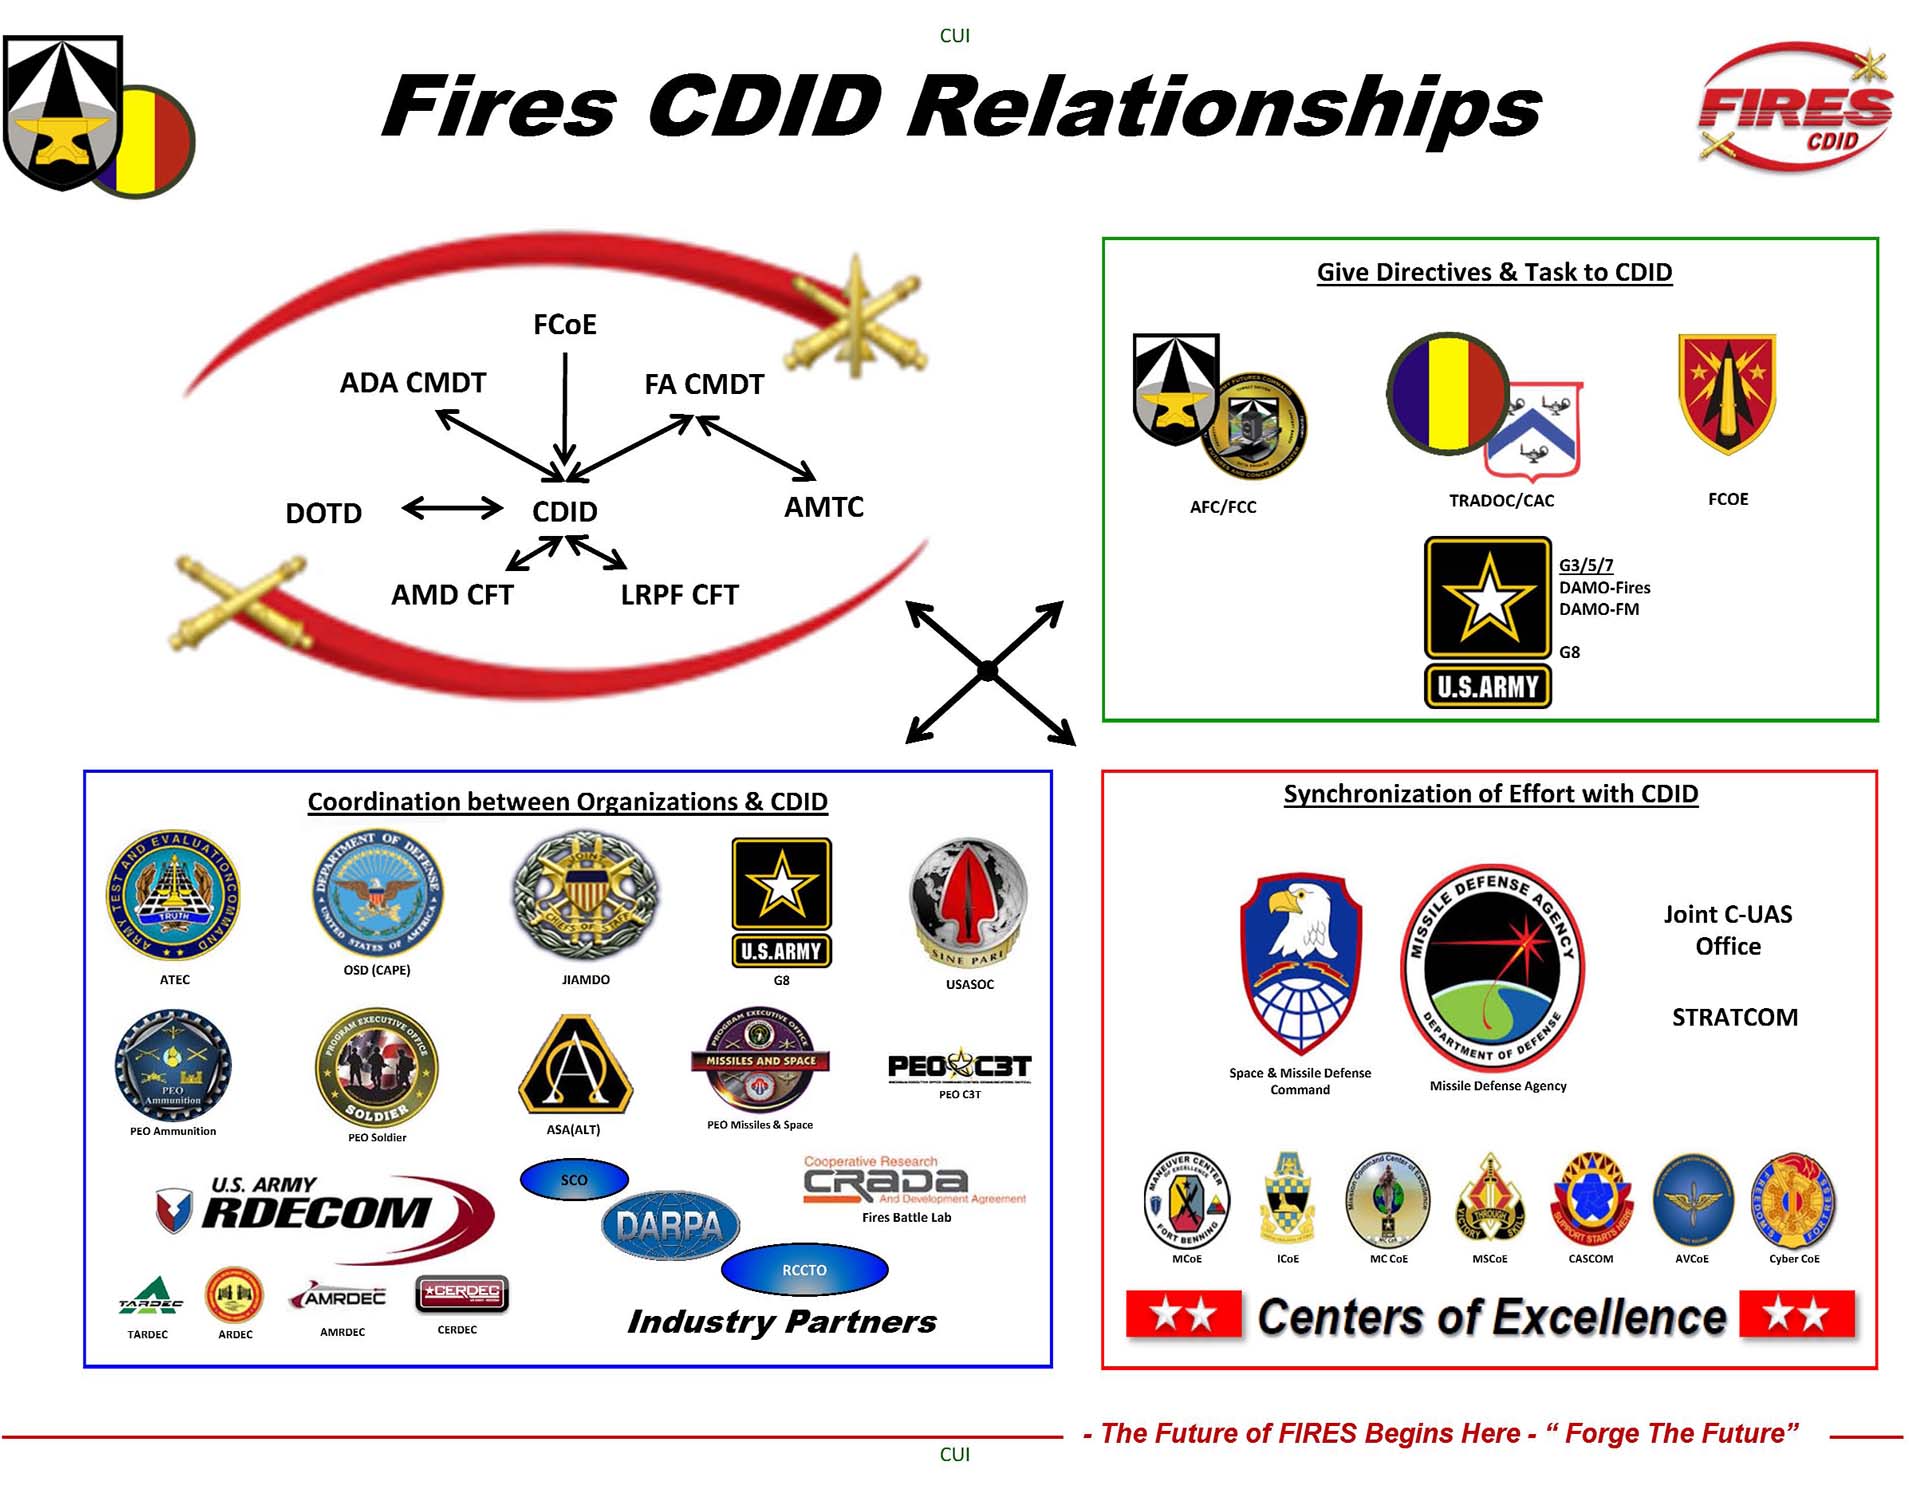 CDID Fort Sill Oklahoma Fires Center of Excellence